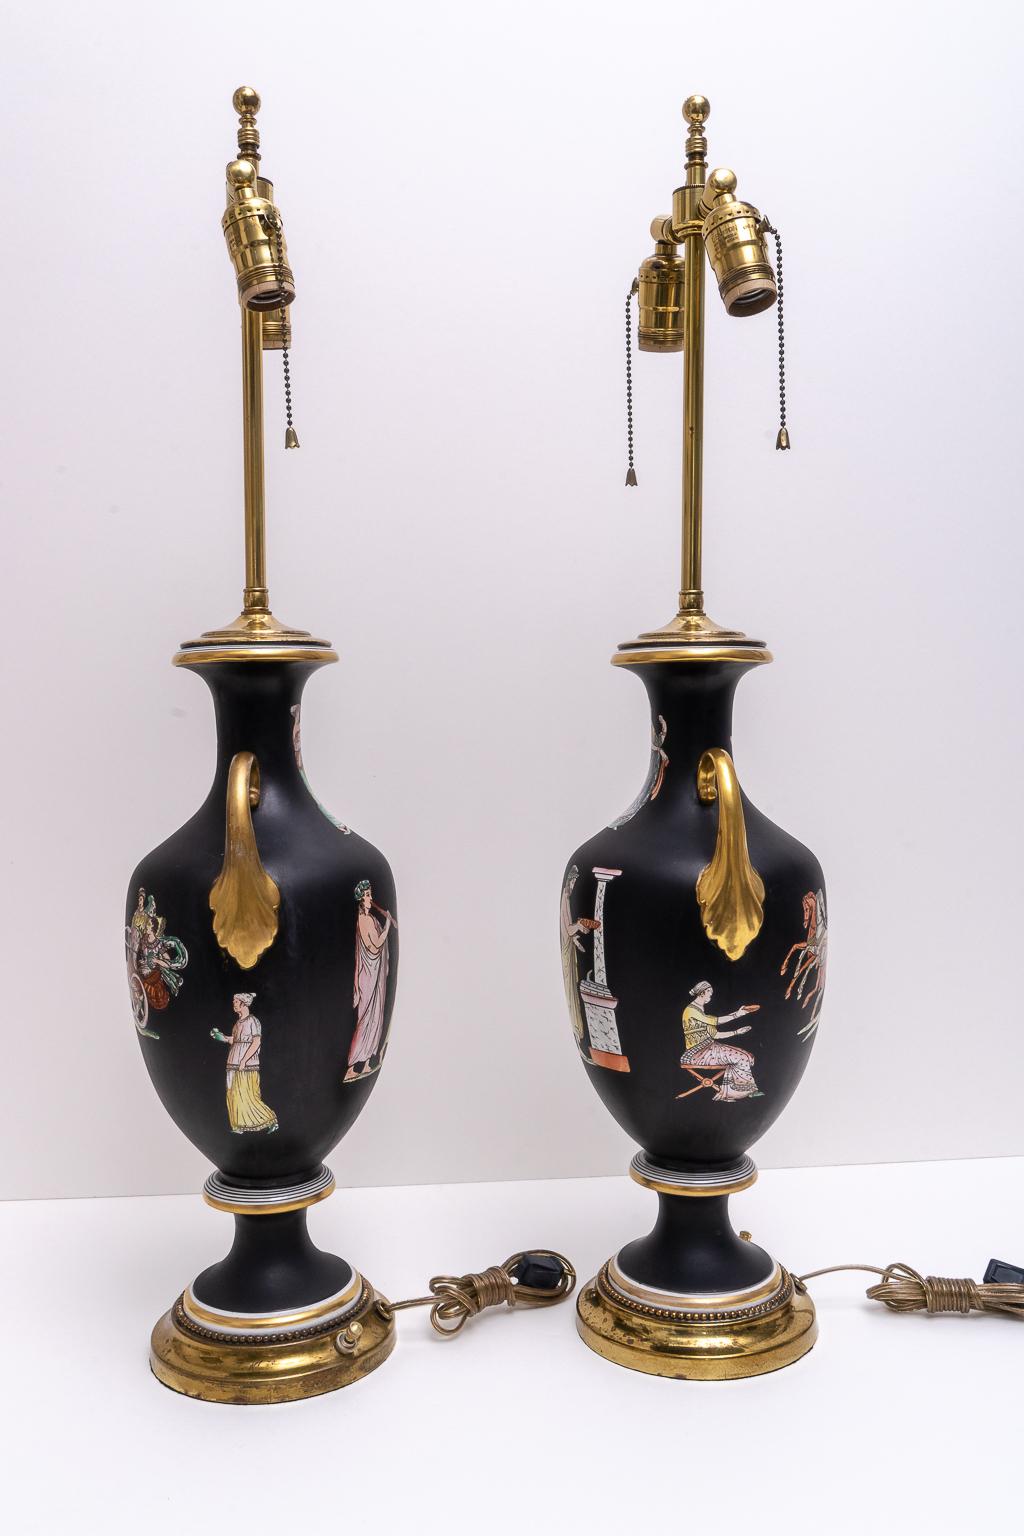 This stylish set of tables lamps were recently acquired from a Palm Beach estate and were originally vases produced during the 